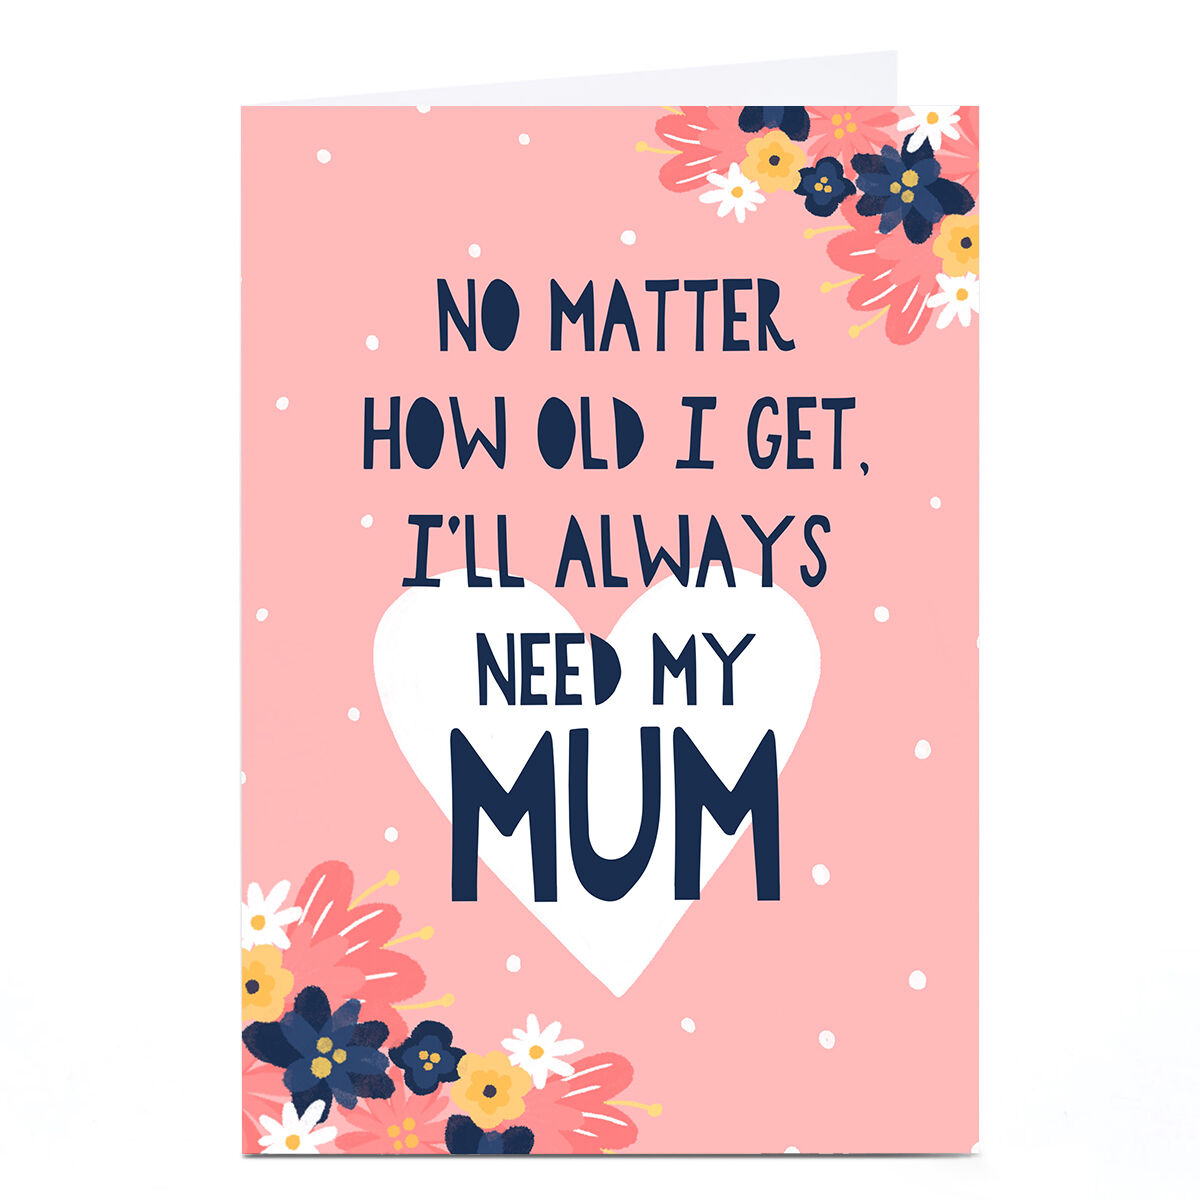 Thank You For Everything Mum Card Mothers Day Photo Card Photo Card from Daughter Mum Photo Card Cute Mum Card, Mothers Day Card UK